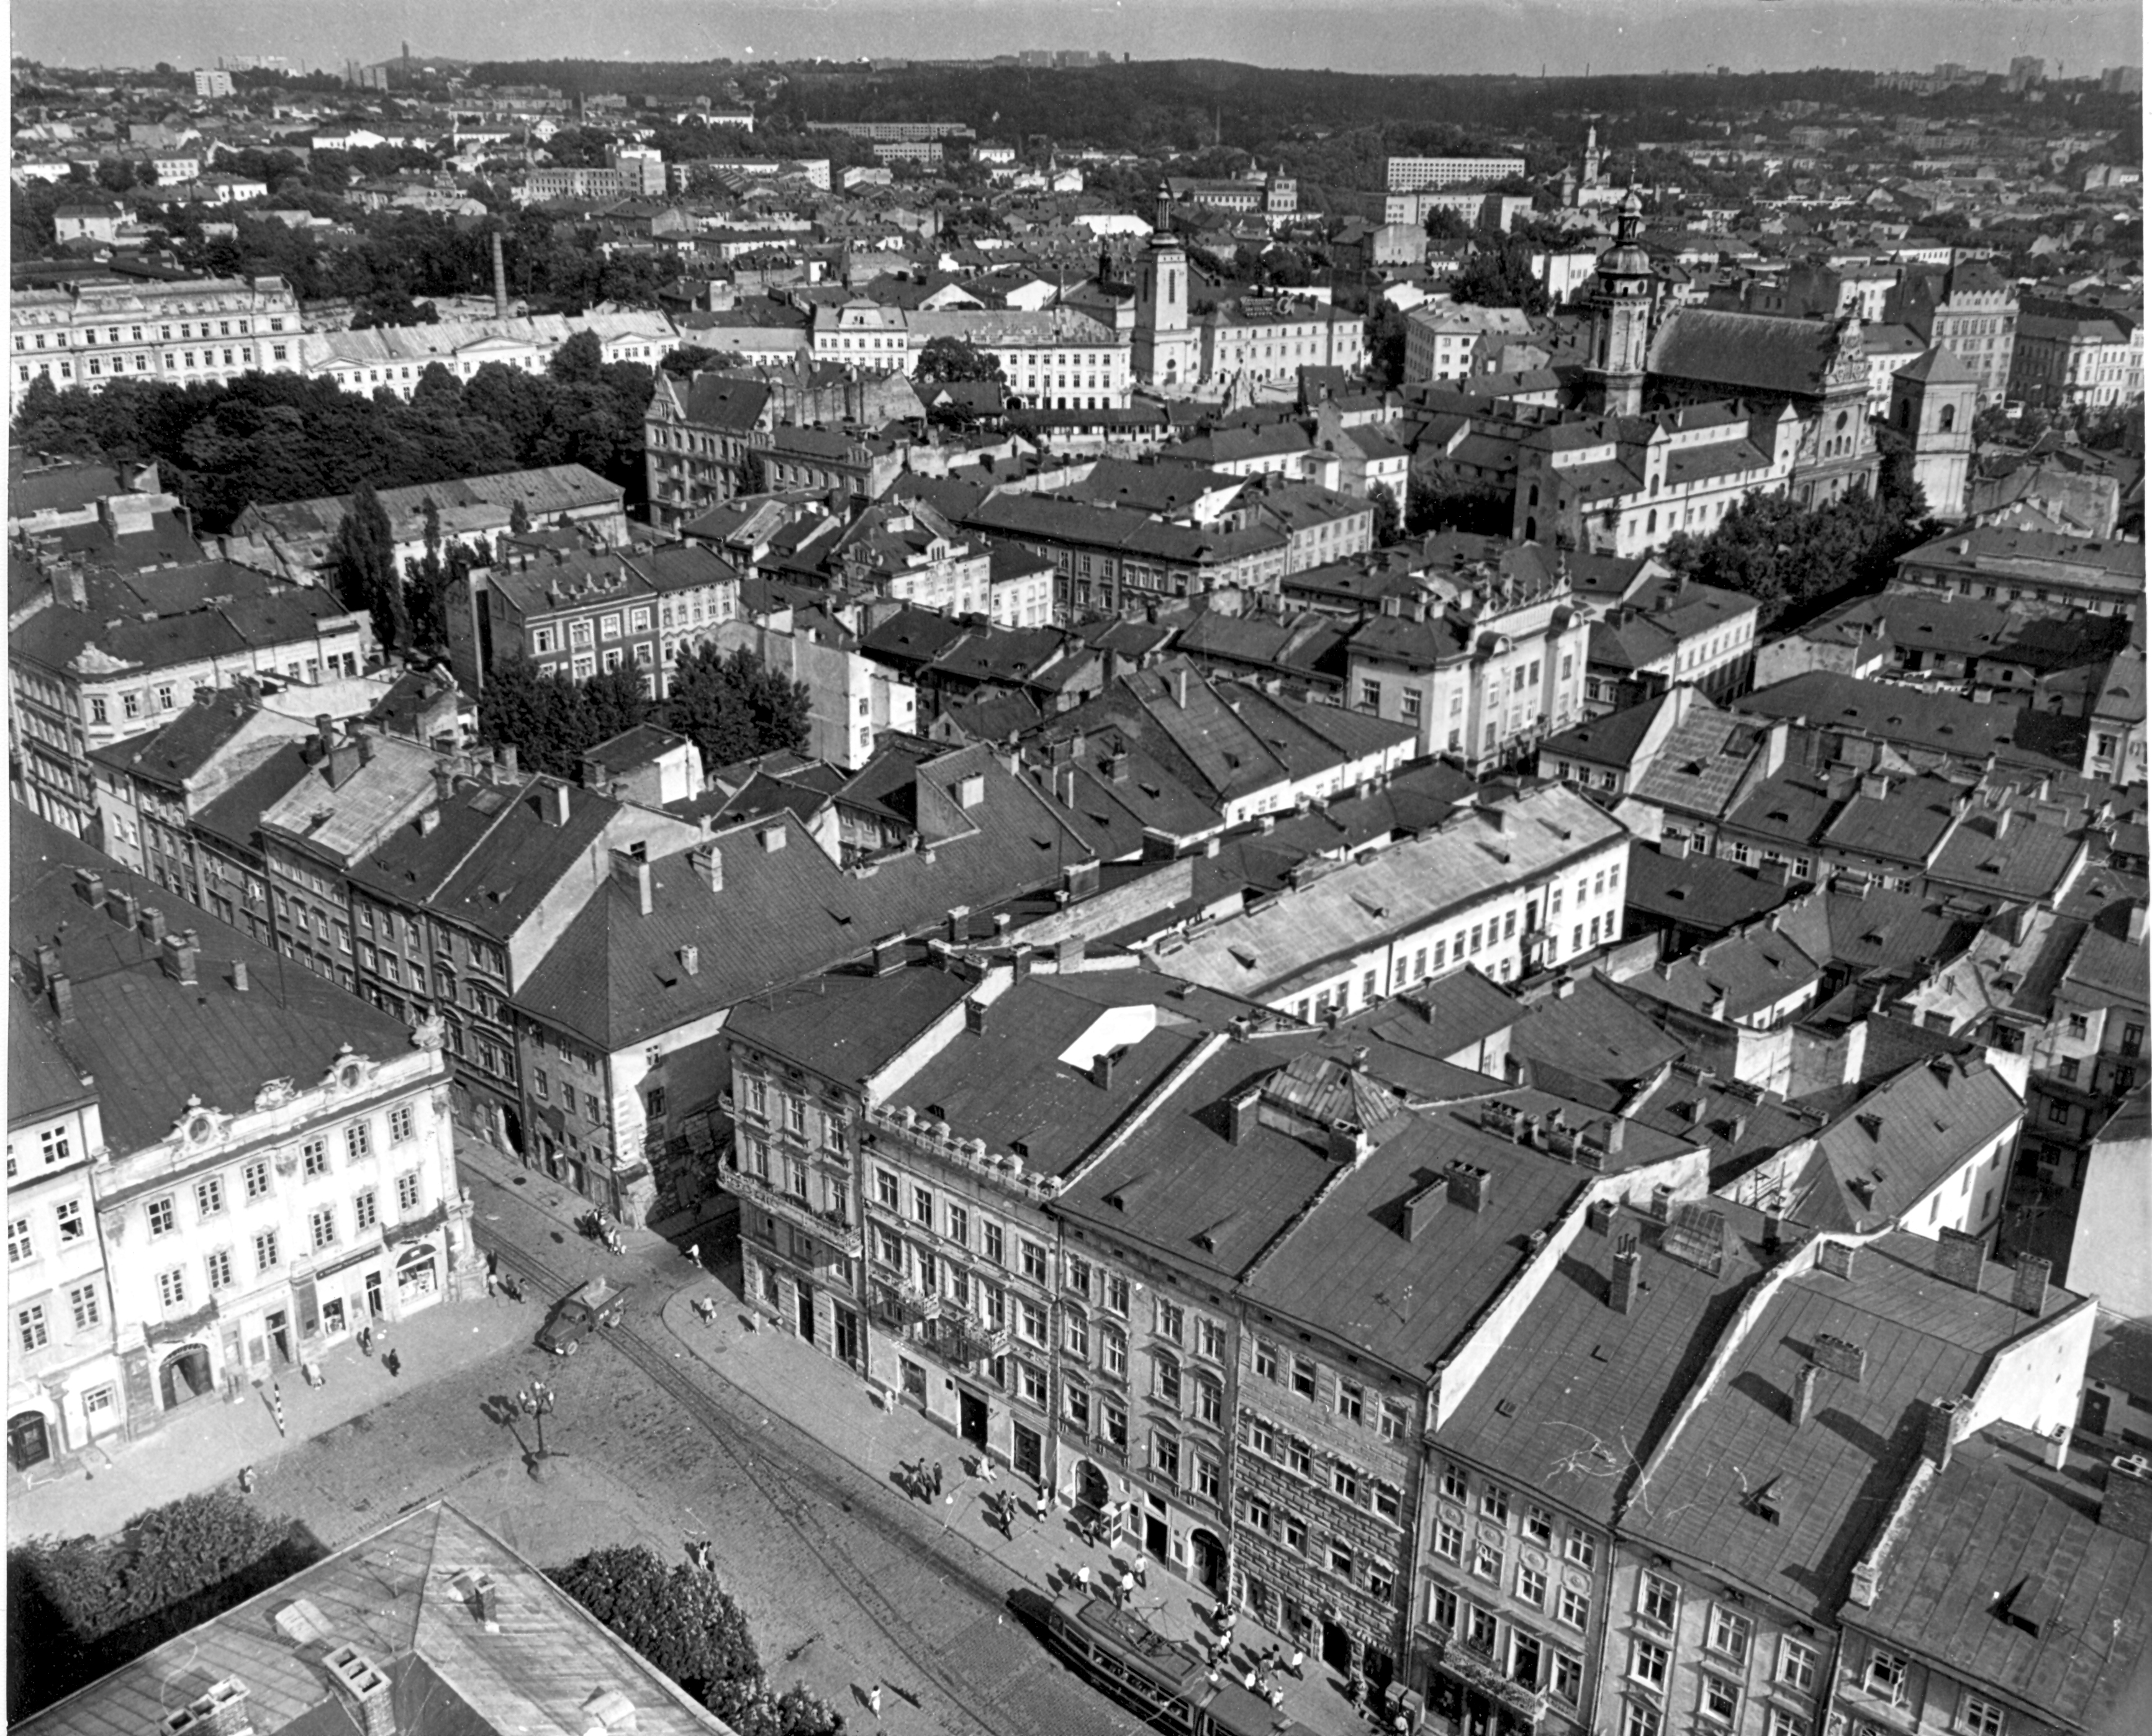 Making and Unmaking Soviet Historical City: Heritage Infrastructures, Imaginaries, and Legacies in Lviv